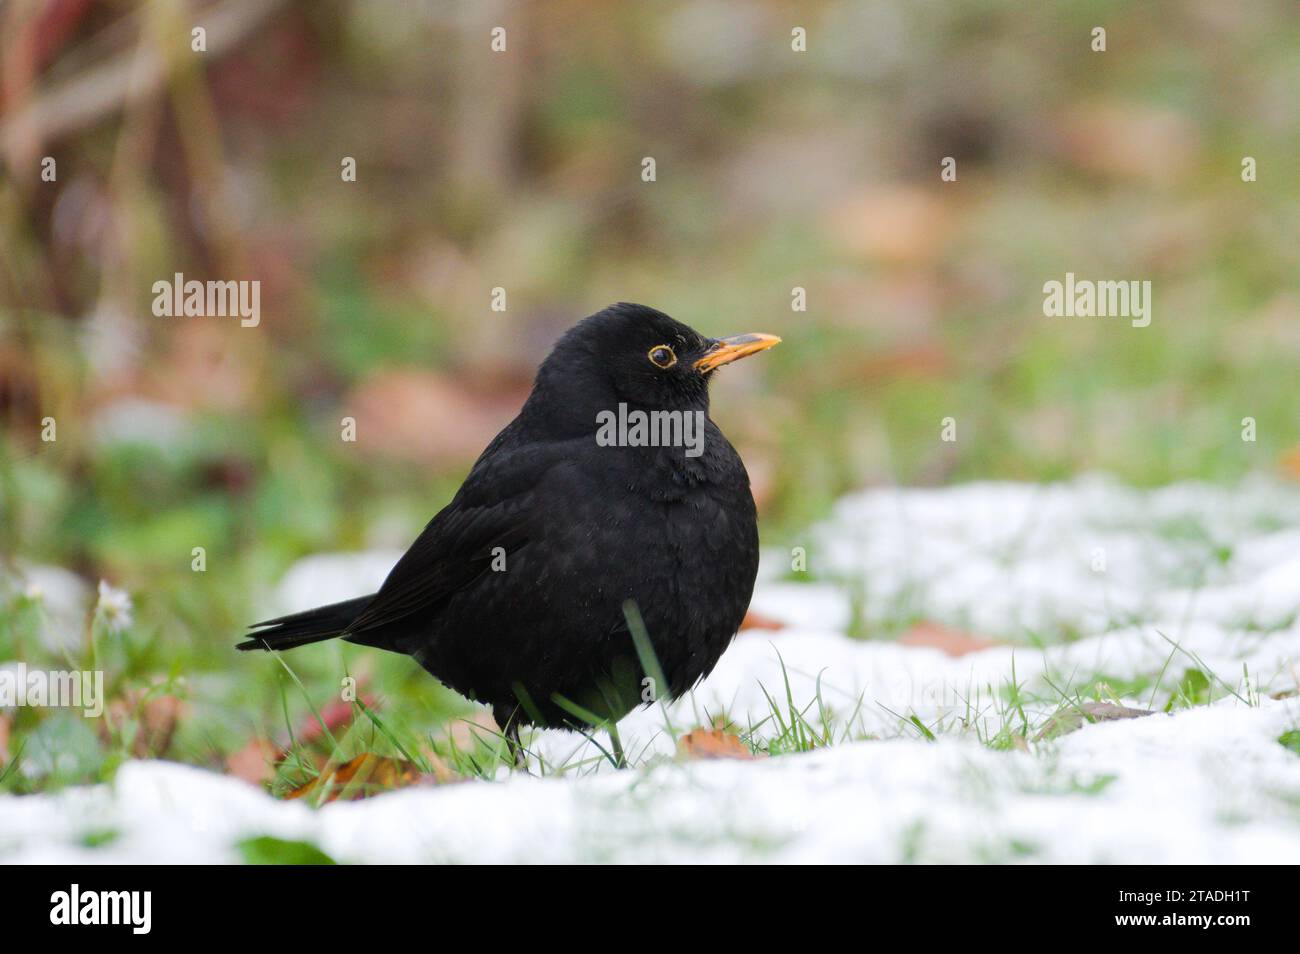 Song bird turdus merula aka eurasian blackbird is searching for food in the grass covered by snow. The most common bird in czech republic. Stock Photo